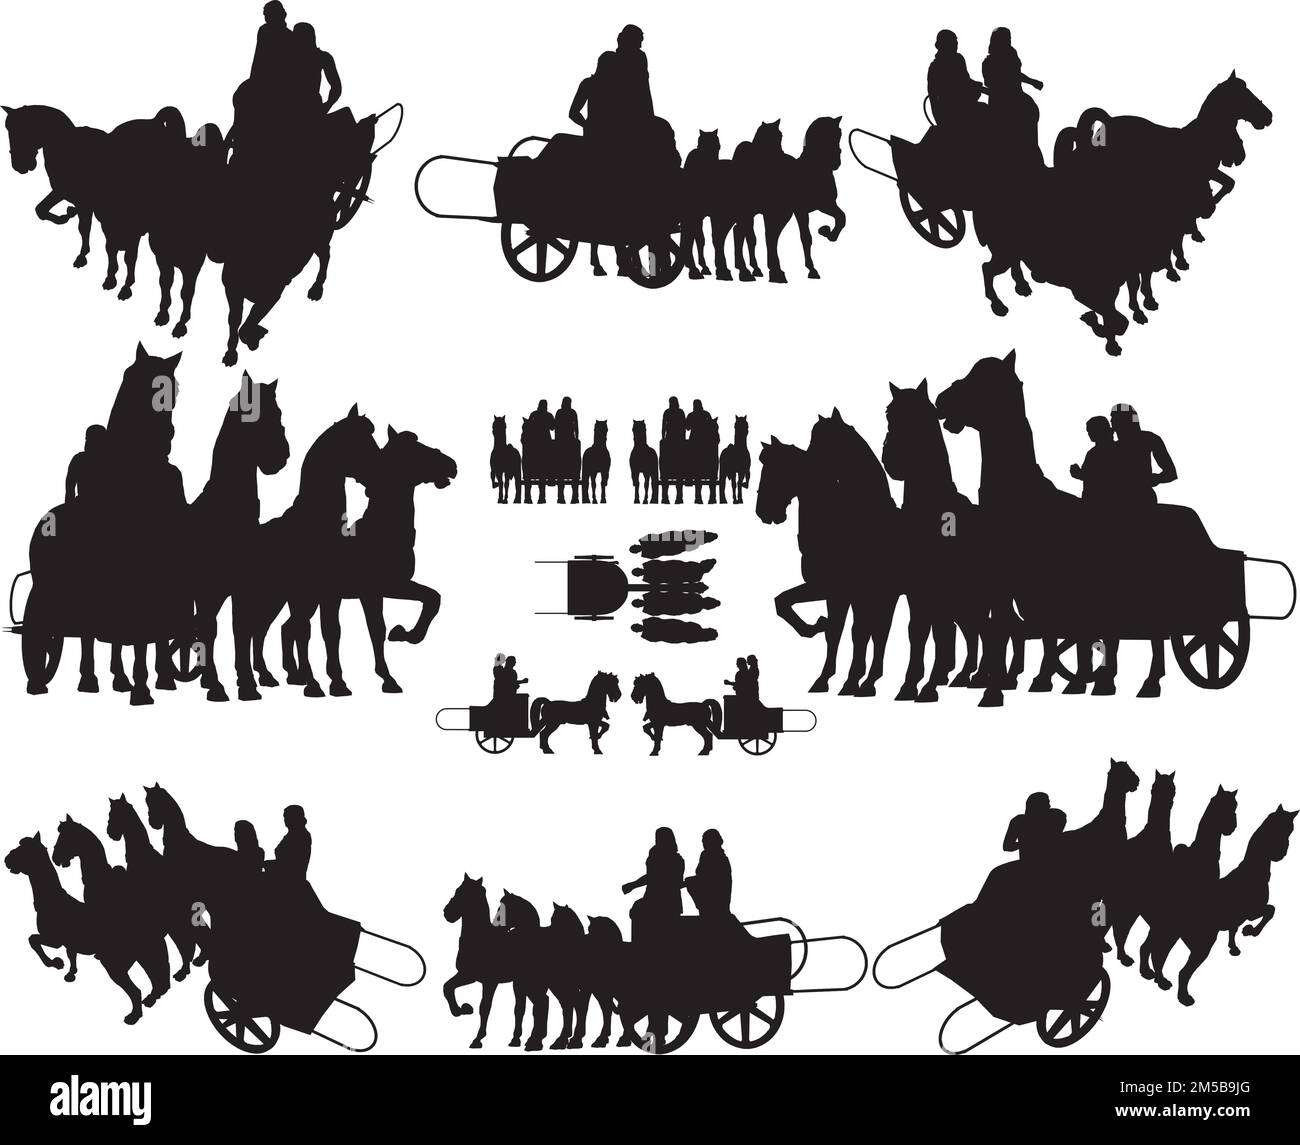 Ancient Chariot With Four Horse Team Vector. Illustration Isolated On White Background. A Vector Illustration Of Antique Chariot. Stock Vector